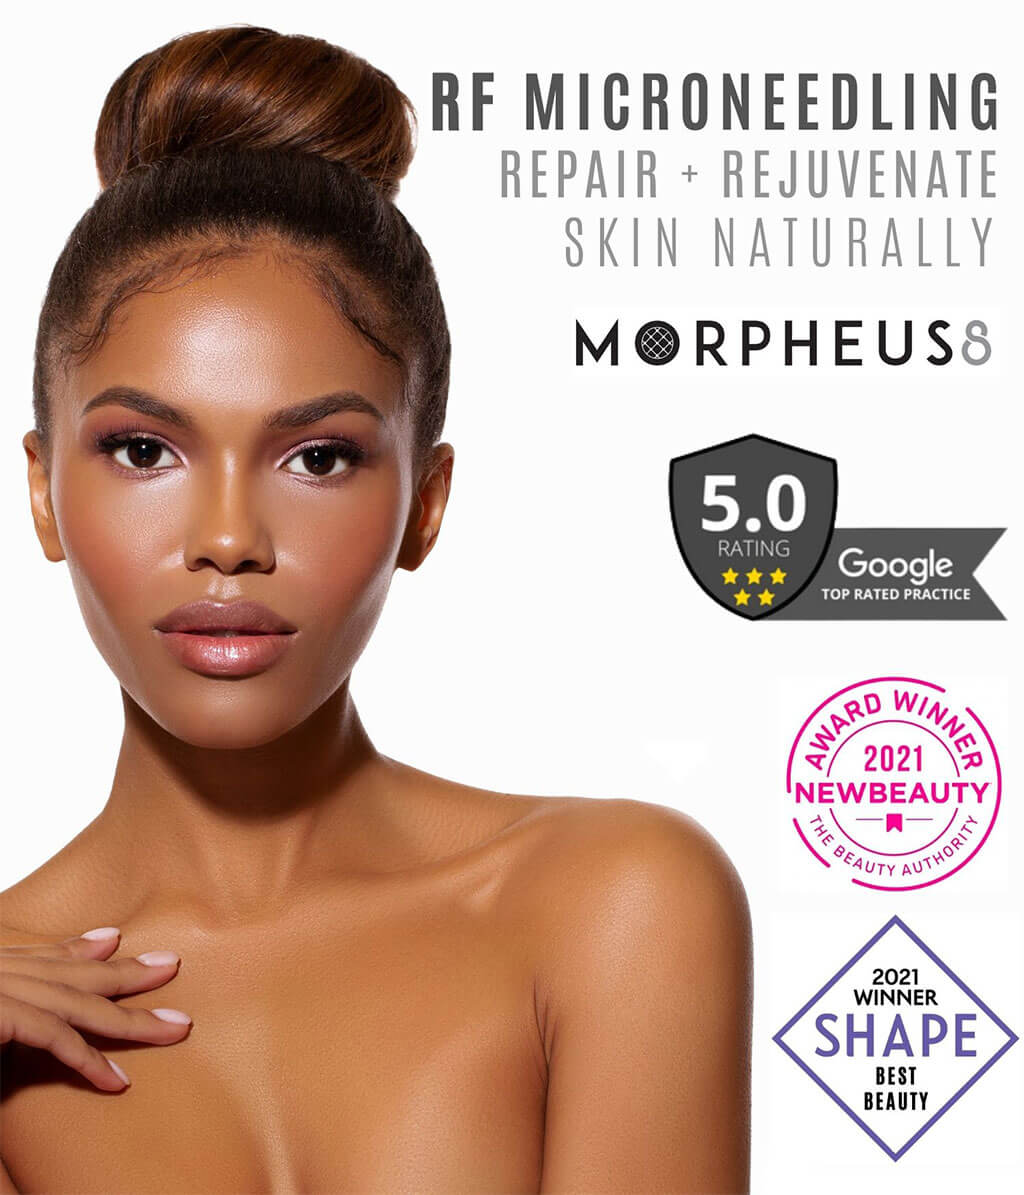 Beautiful woman with radiant skin modeling for RF Microneedling, Morpheus8 at Viva Atlanta Wellness in Kennesaw, GA. Top rated medical spa.